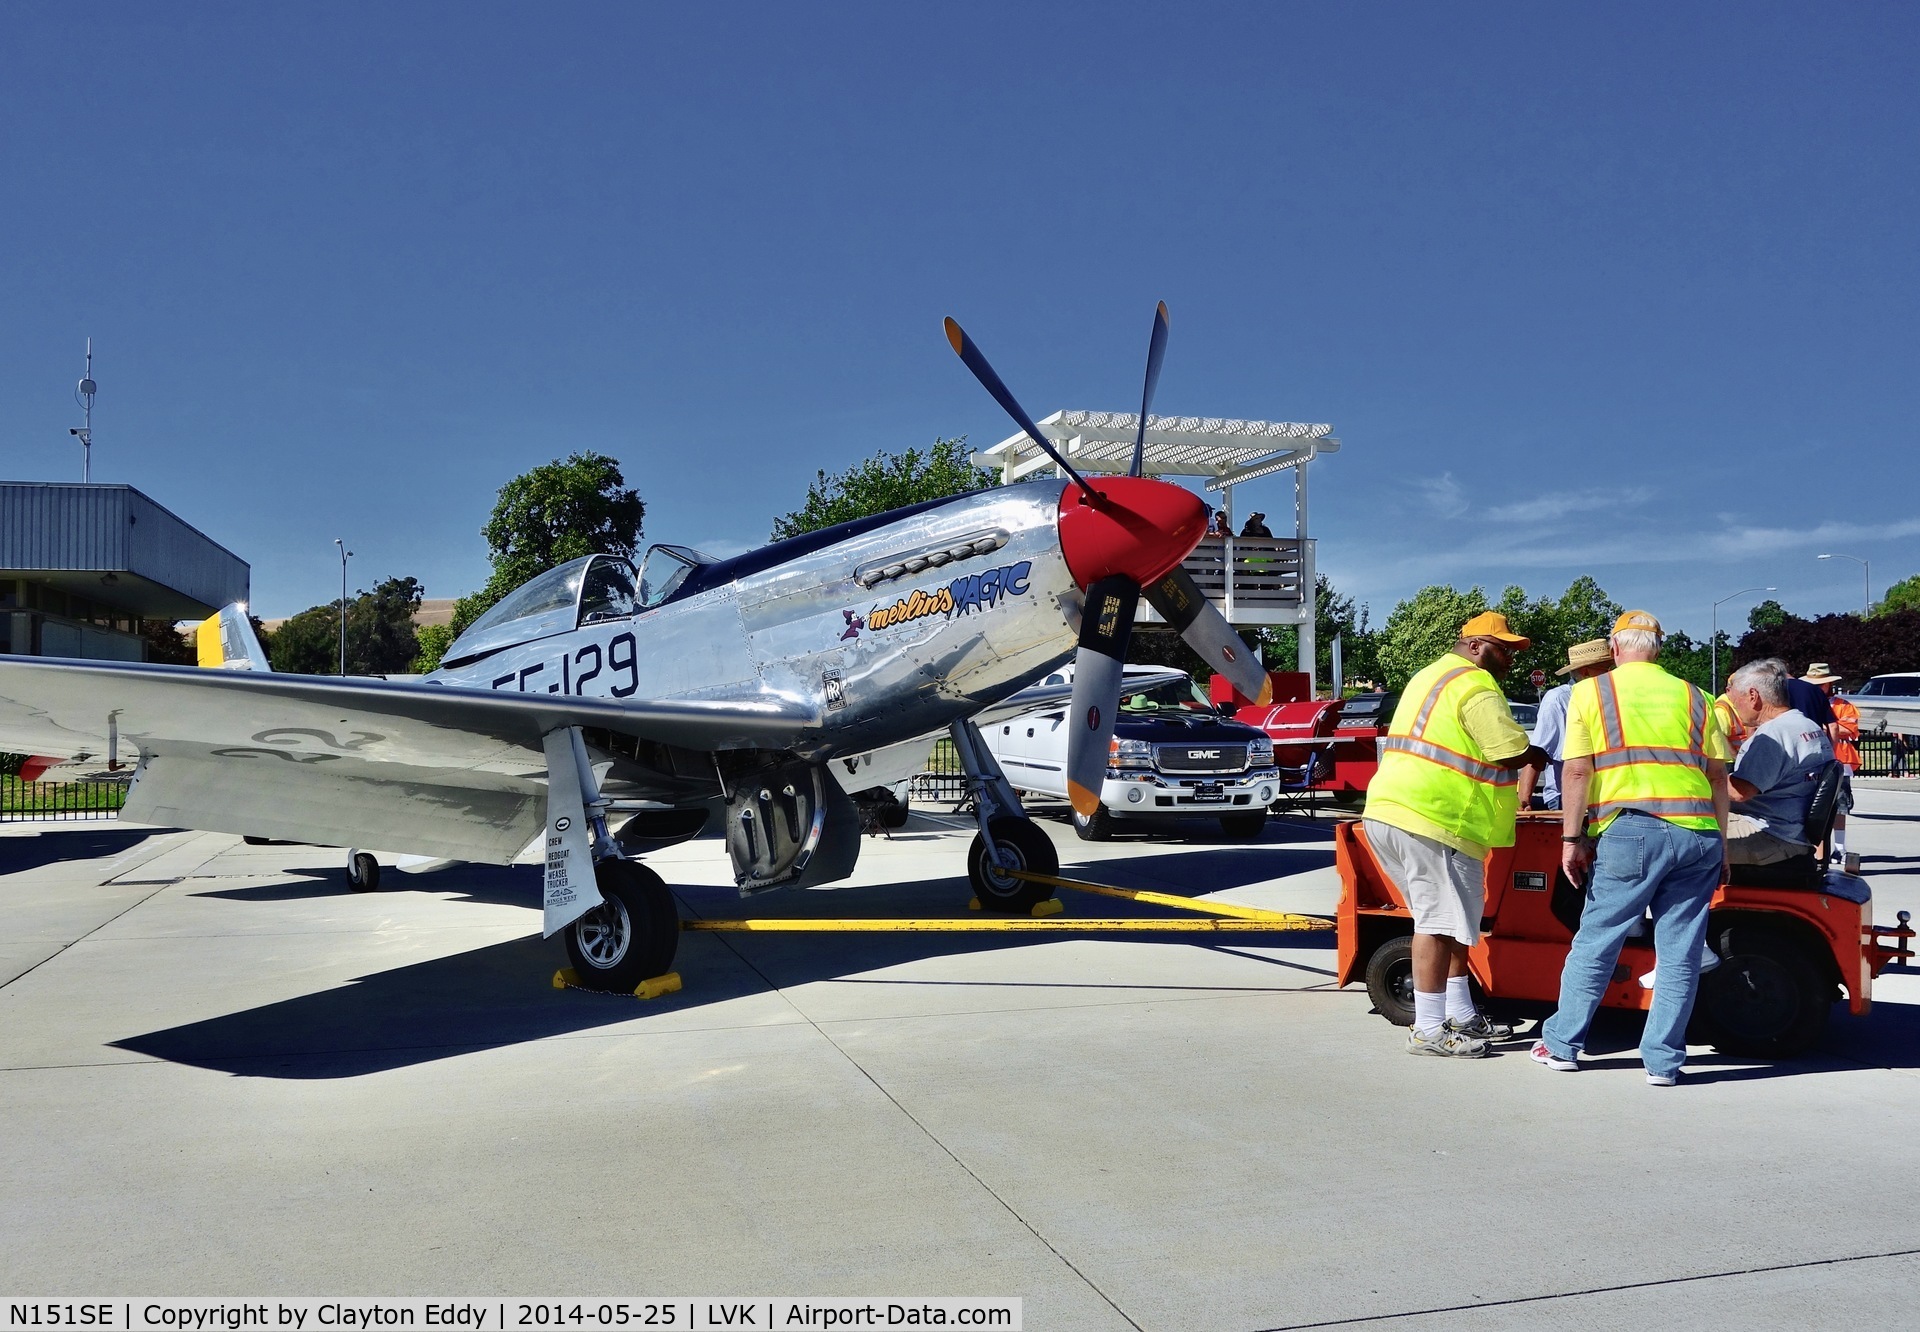 N151SE, 1944 North American P-51D Mustang C/N 122-39588 (44-73129), Collings Foundation Livermore Airport California 2015.